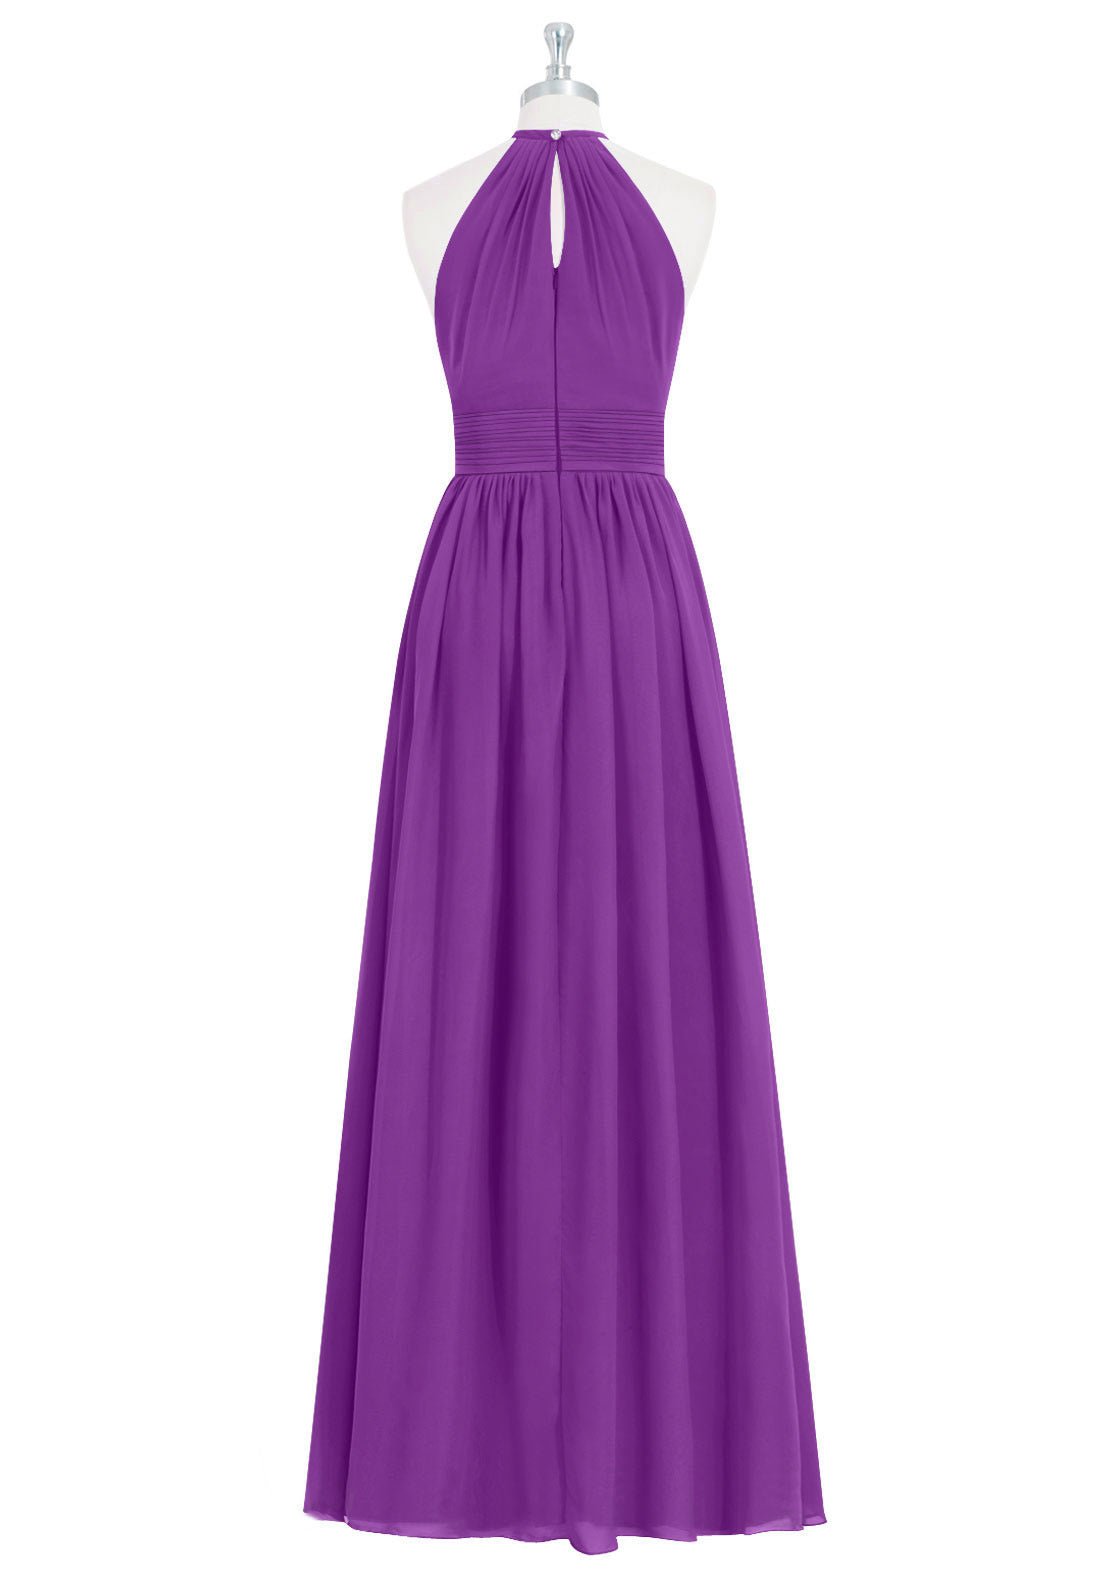 Chiffon Bridesmaid Dress A-Line/Princess Scoop Neck Ankle-Length With Pleated - dennisdresses